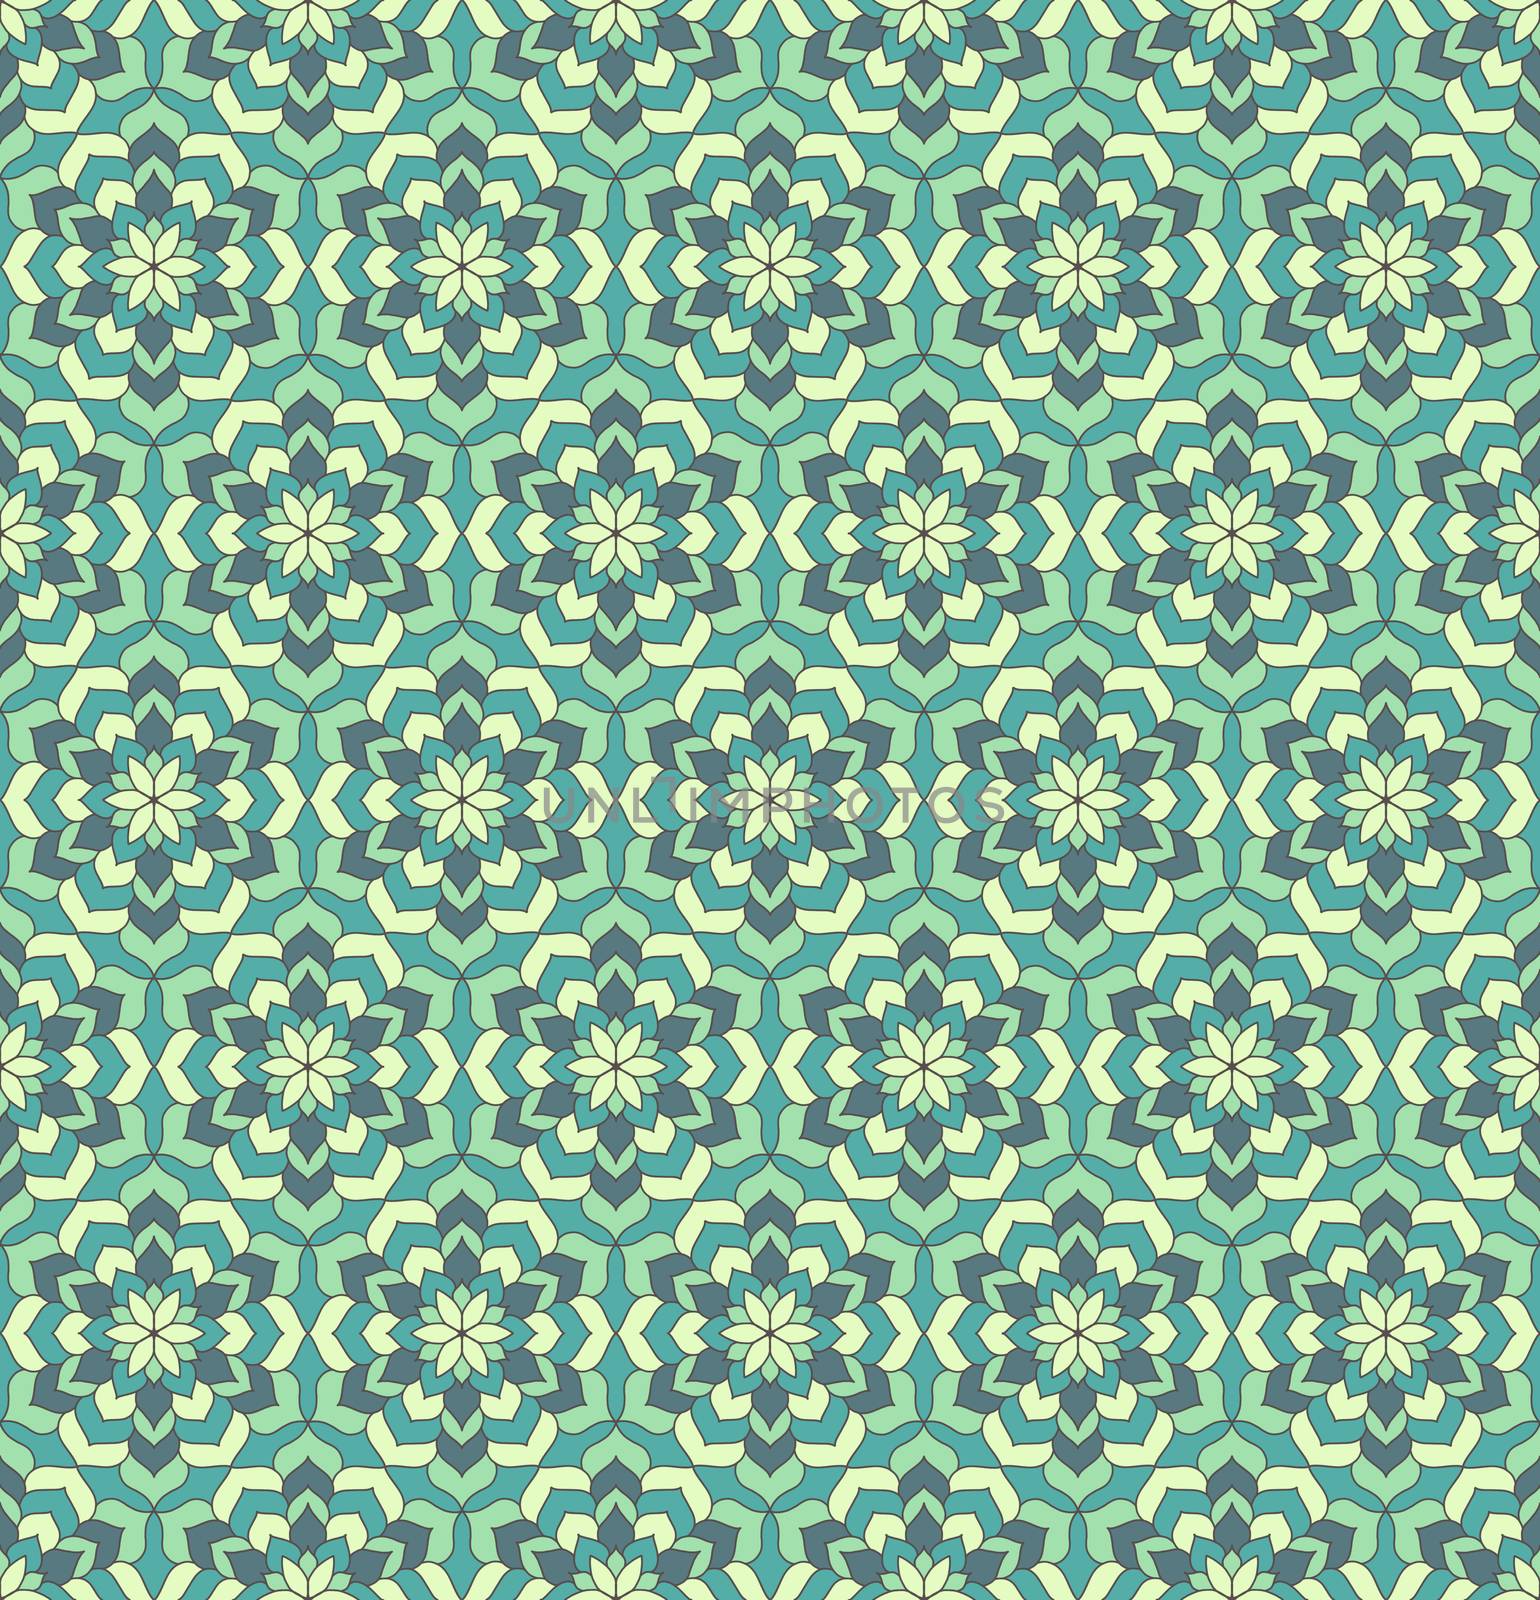 Green flower seamless patterns by eaglesky